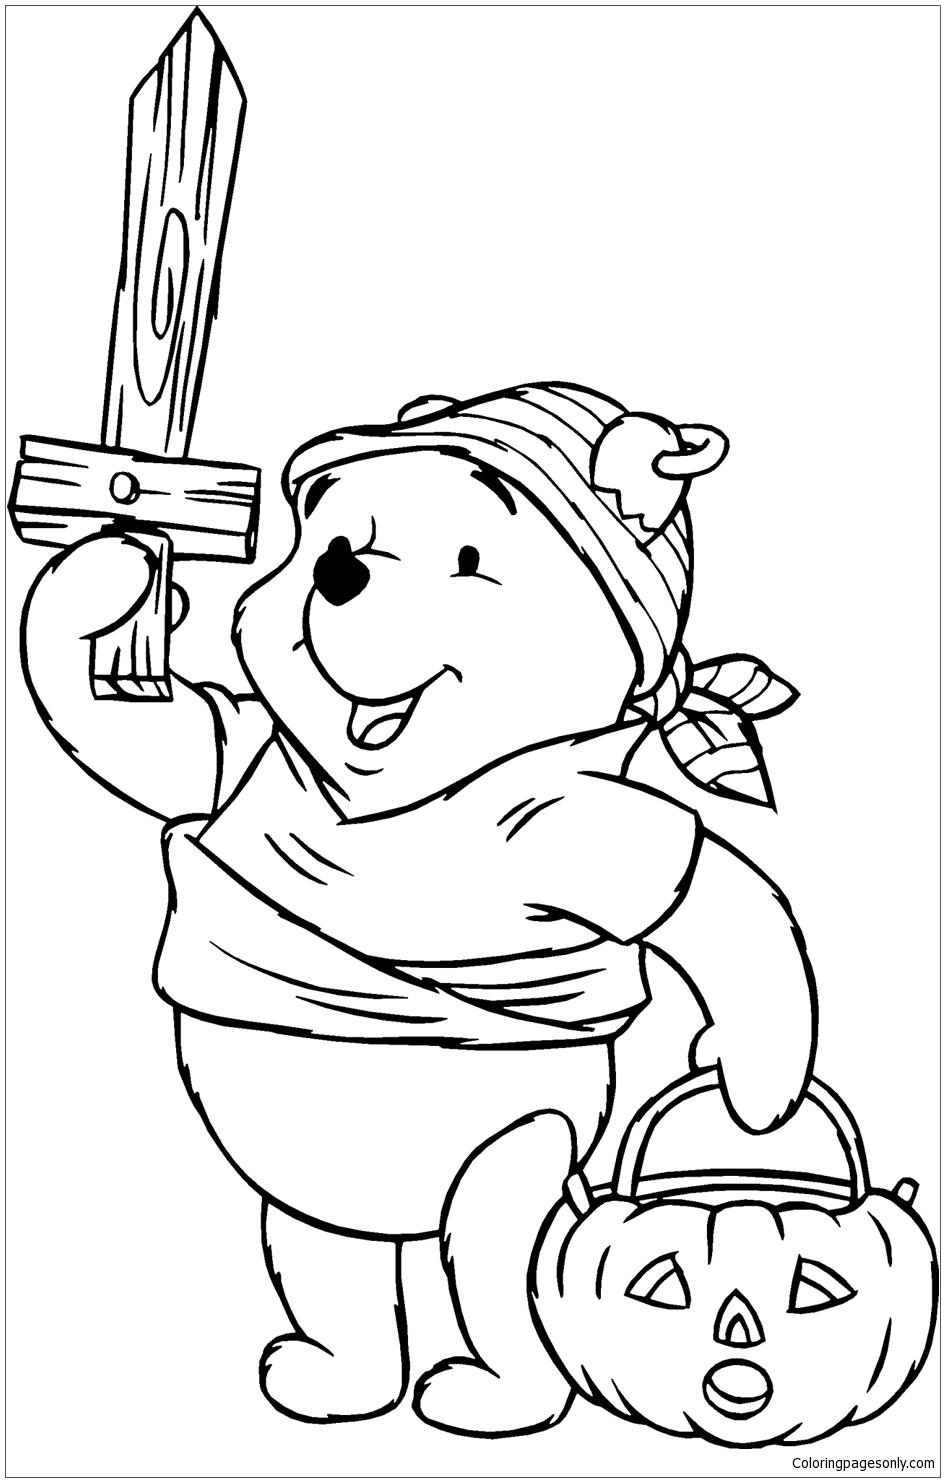 Disney Winnie The Pooh Pirate Coloring Pages